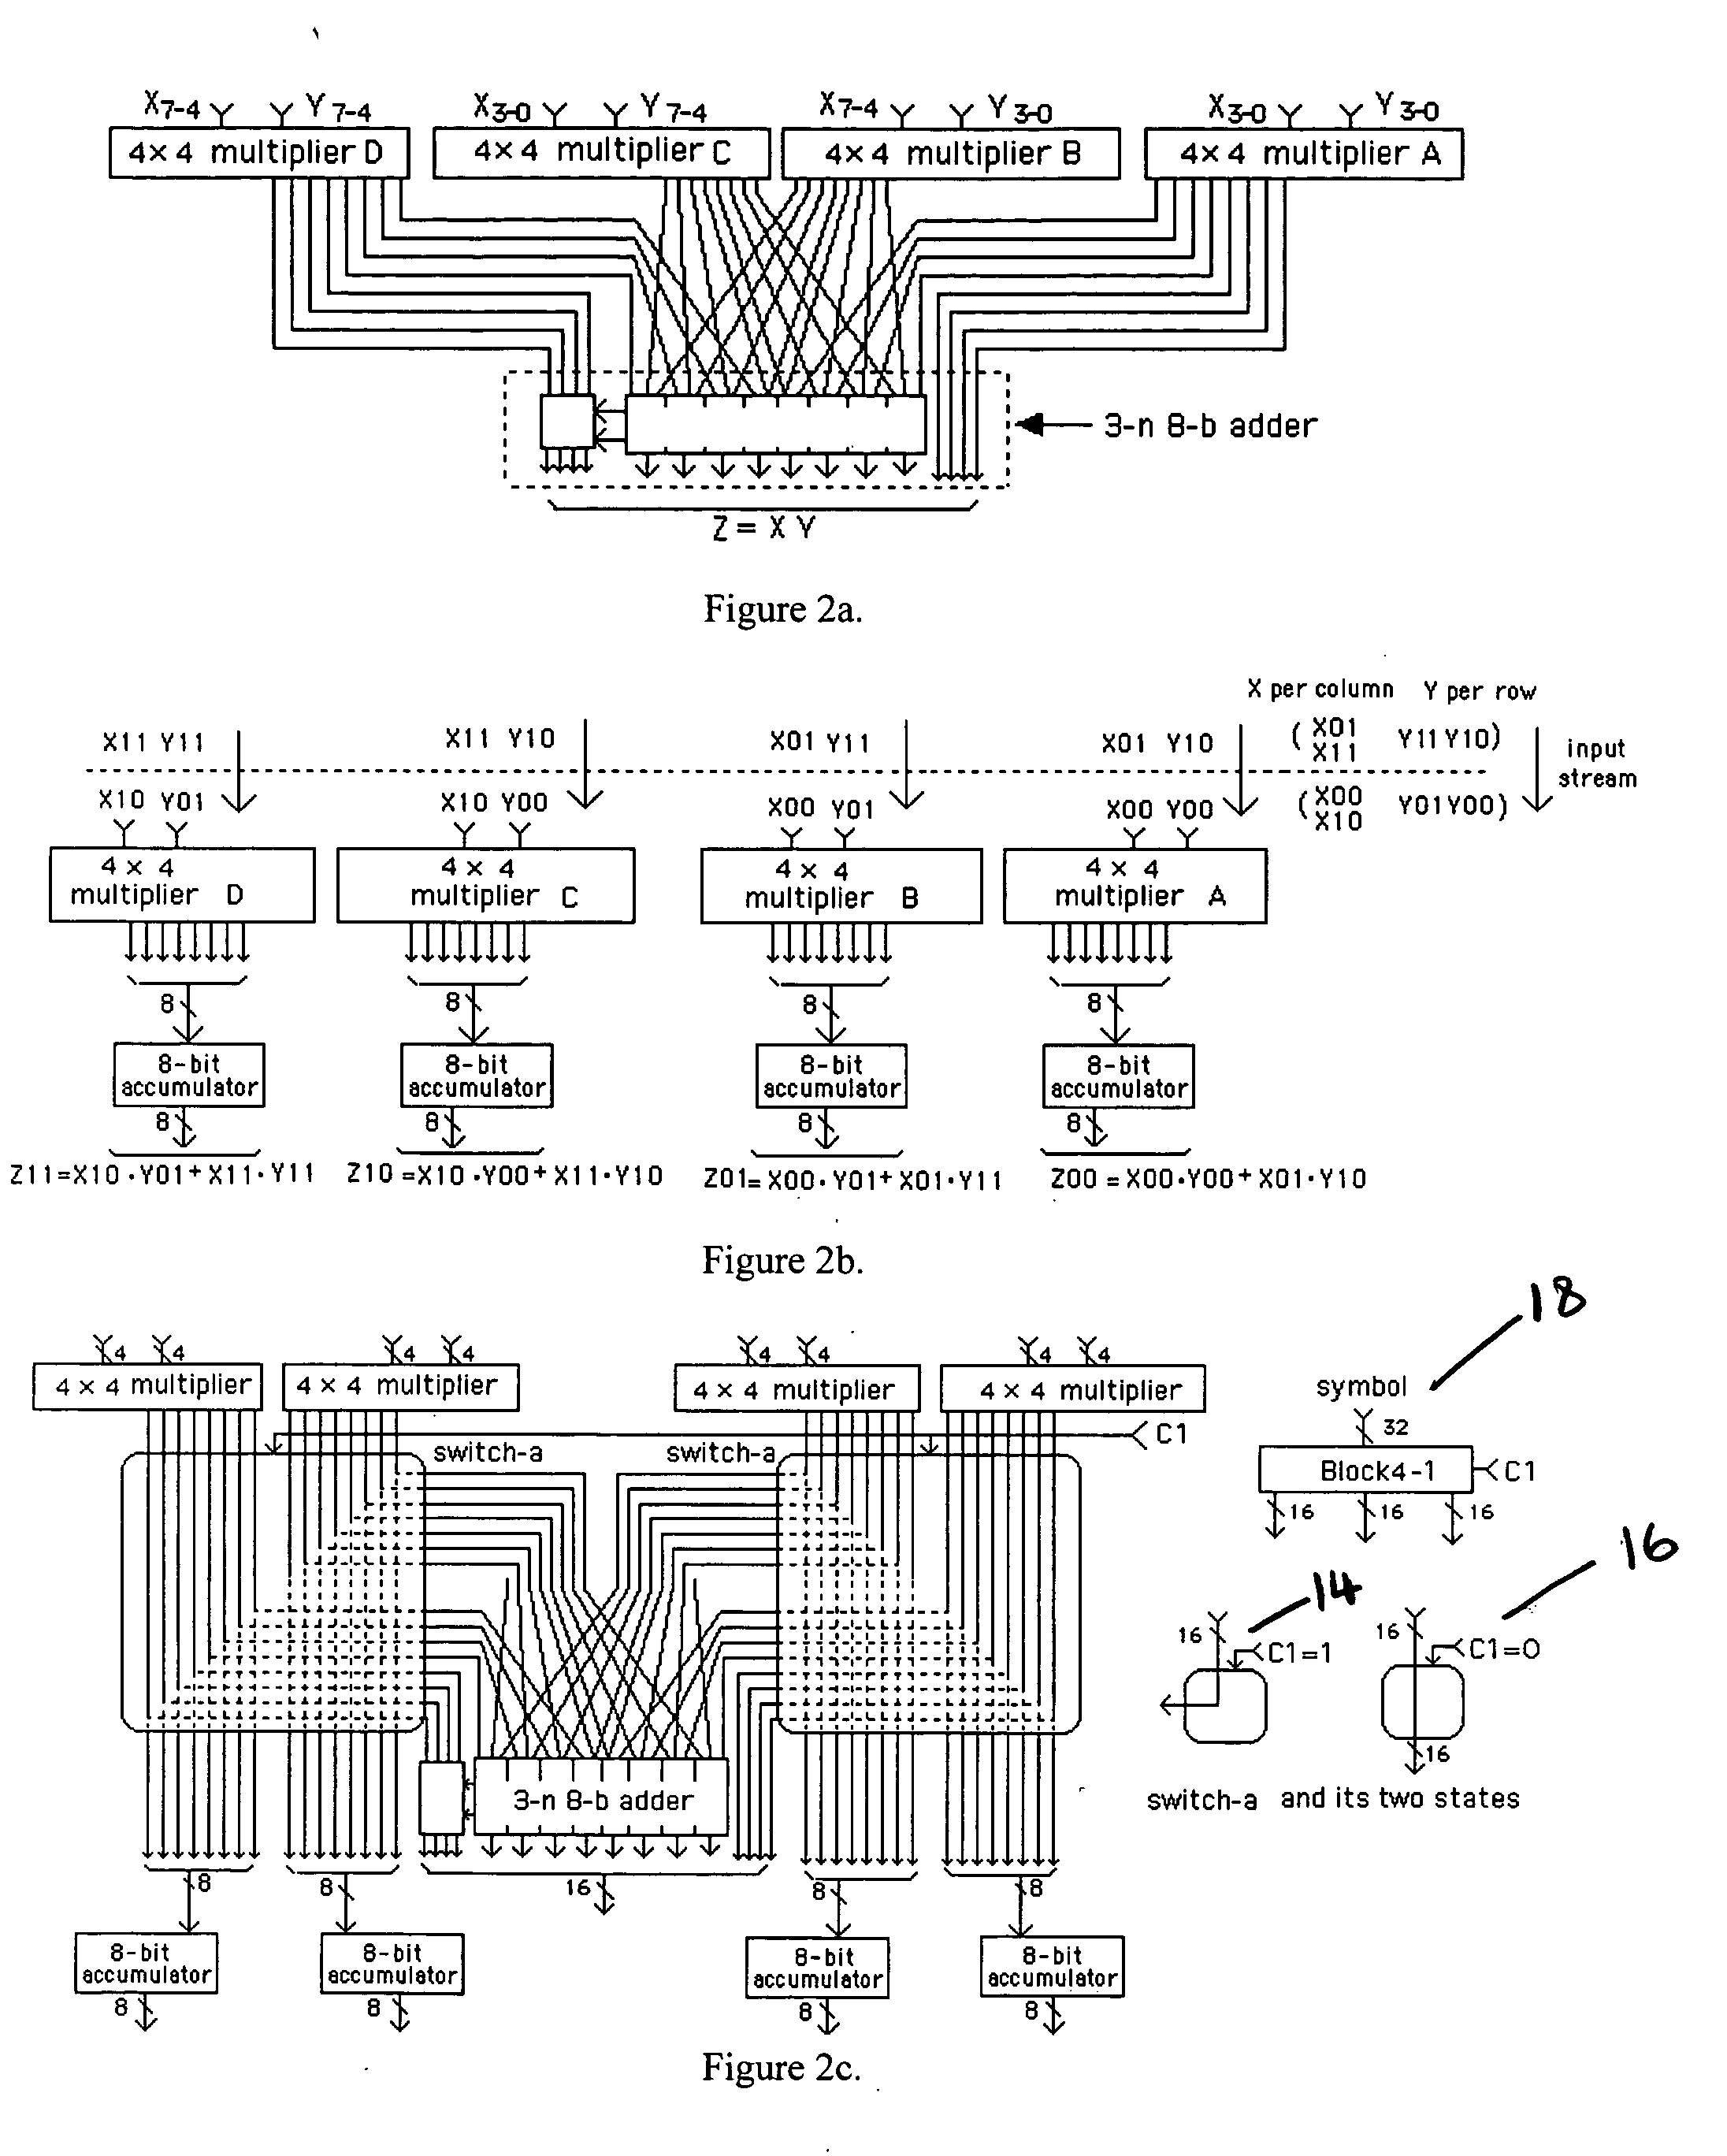 Reconfigurable matrix multiplier architecture and extended borrow parallel counter and small-multiplier circuits